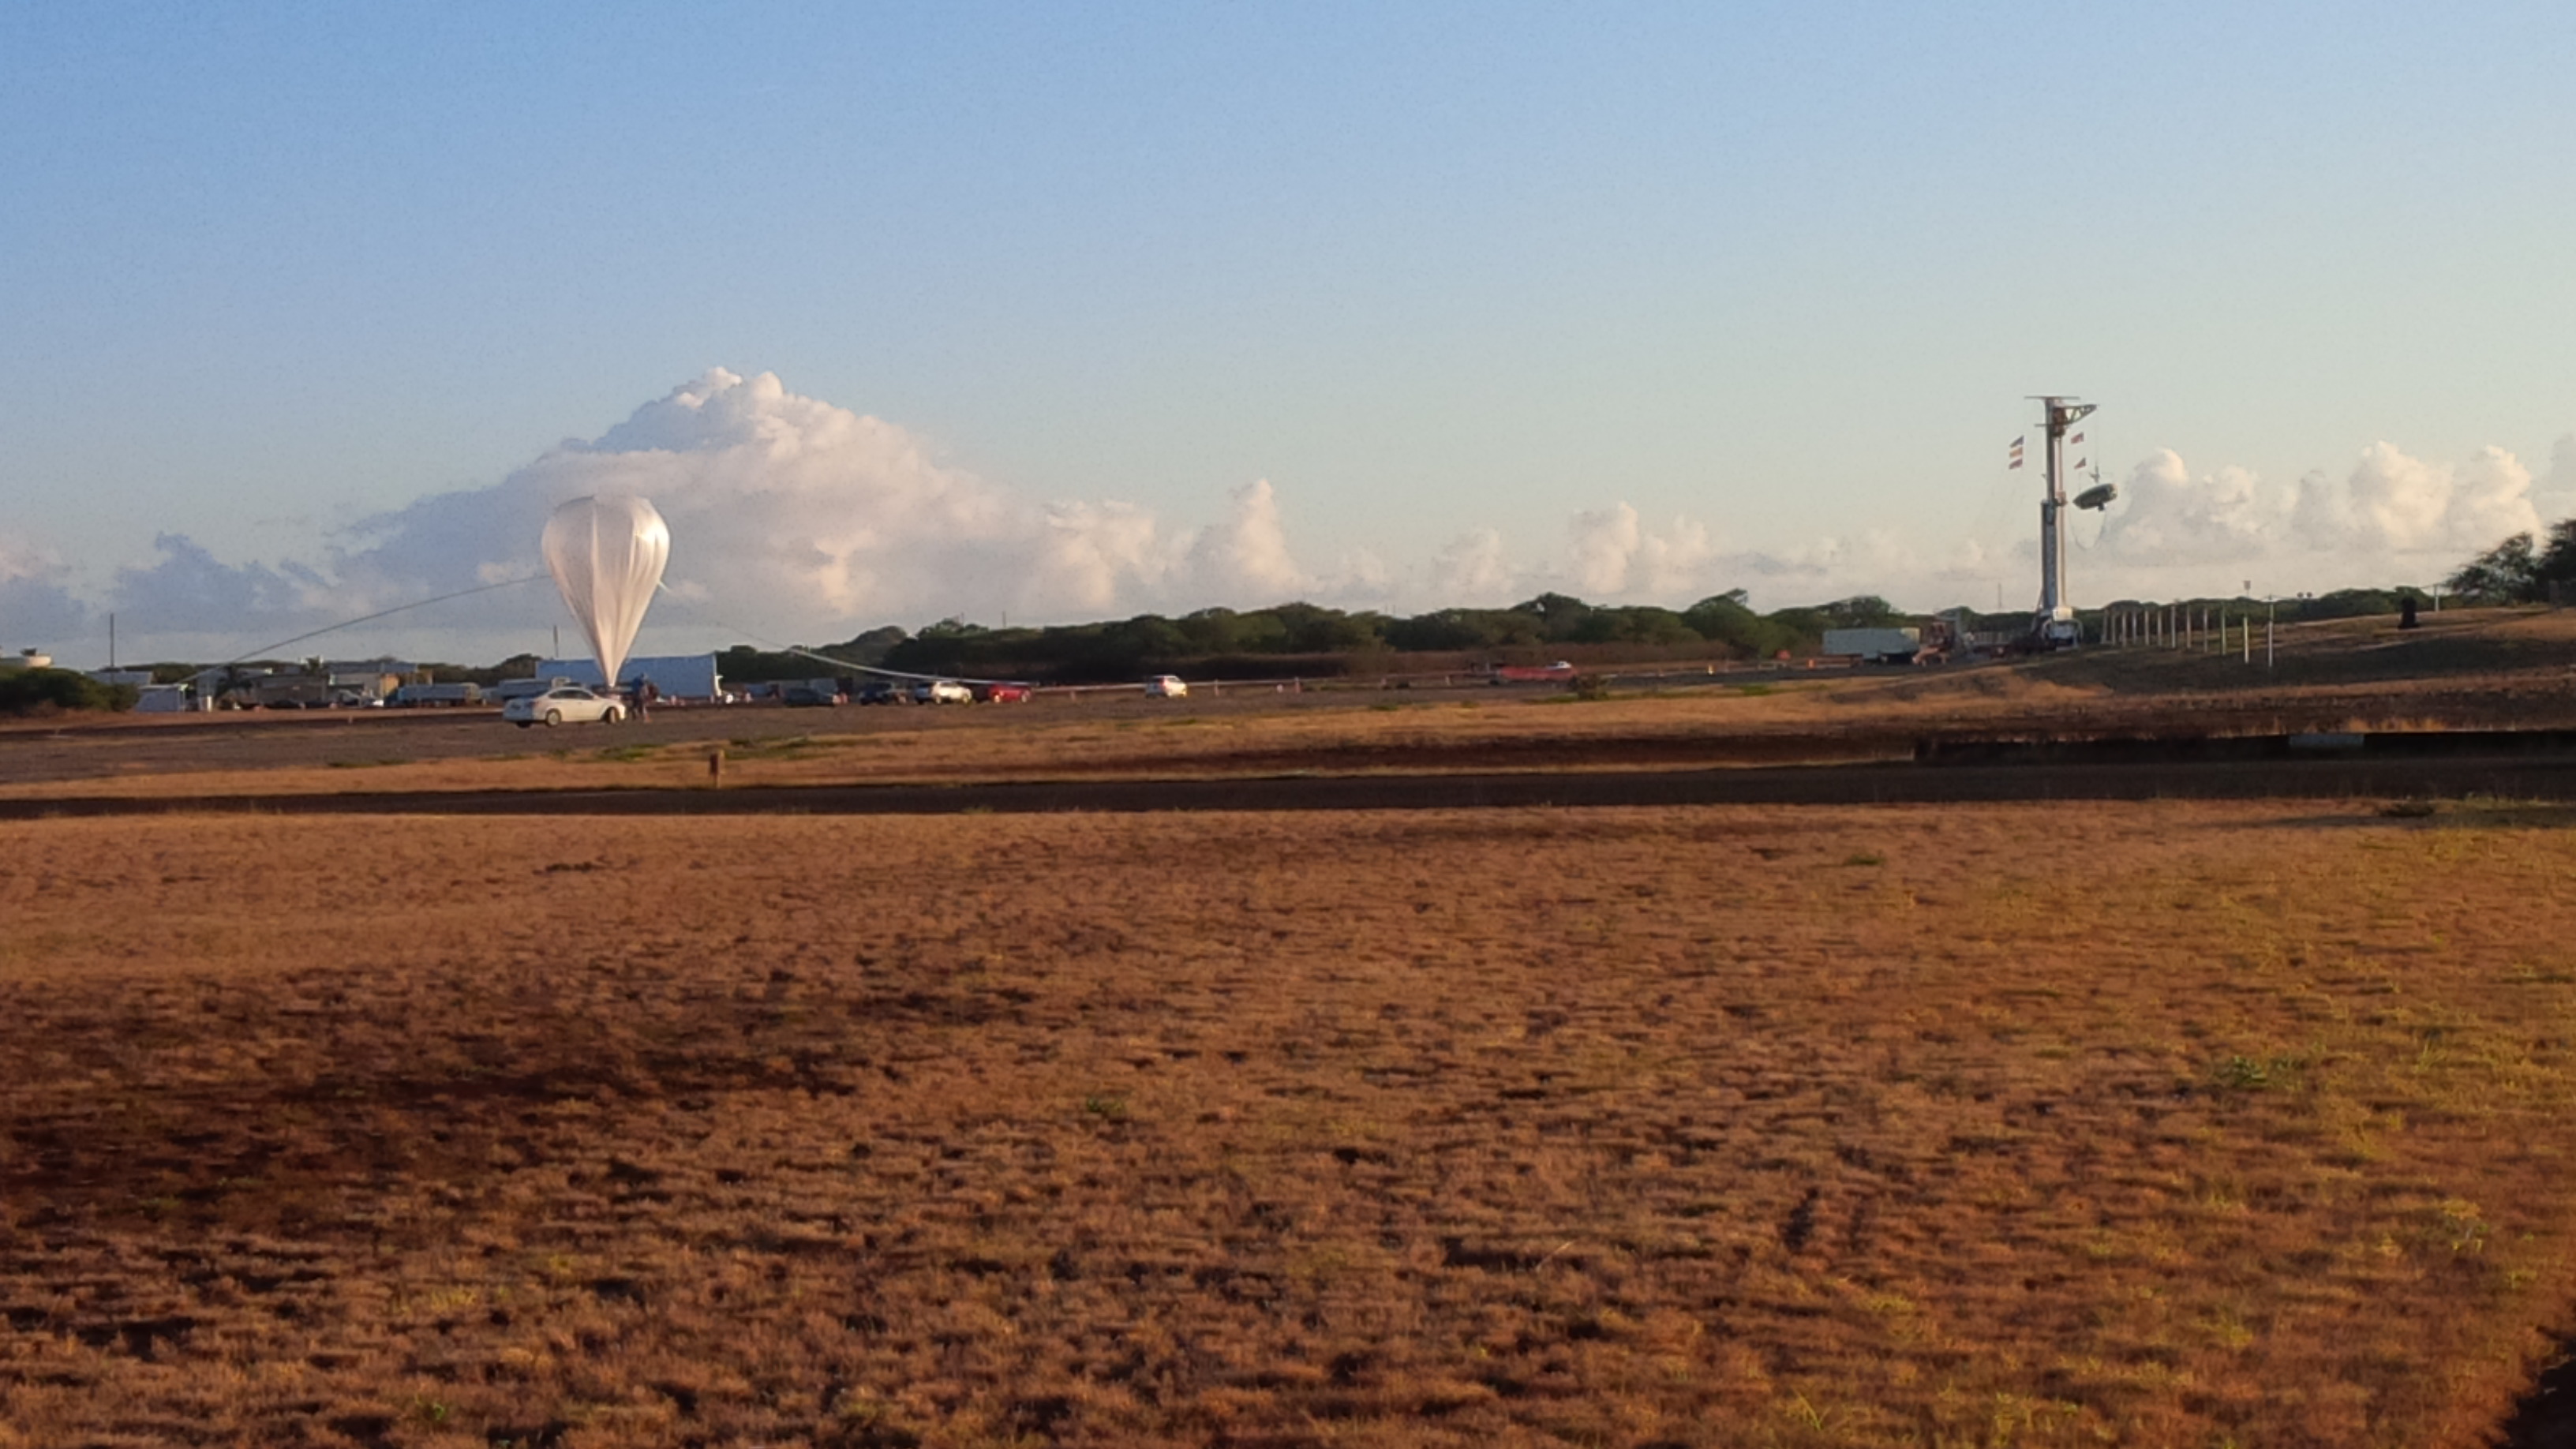 From NASA: "LDSD is proceeding toward launch. The large scientific balloon – 34.4 million cubic feet in volume, has been undoing inflation over the last hour. When launched, the balloon and the test vehicle stand at a towering 980 feet tall." Photo Credit: NASA